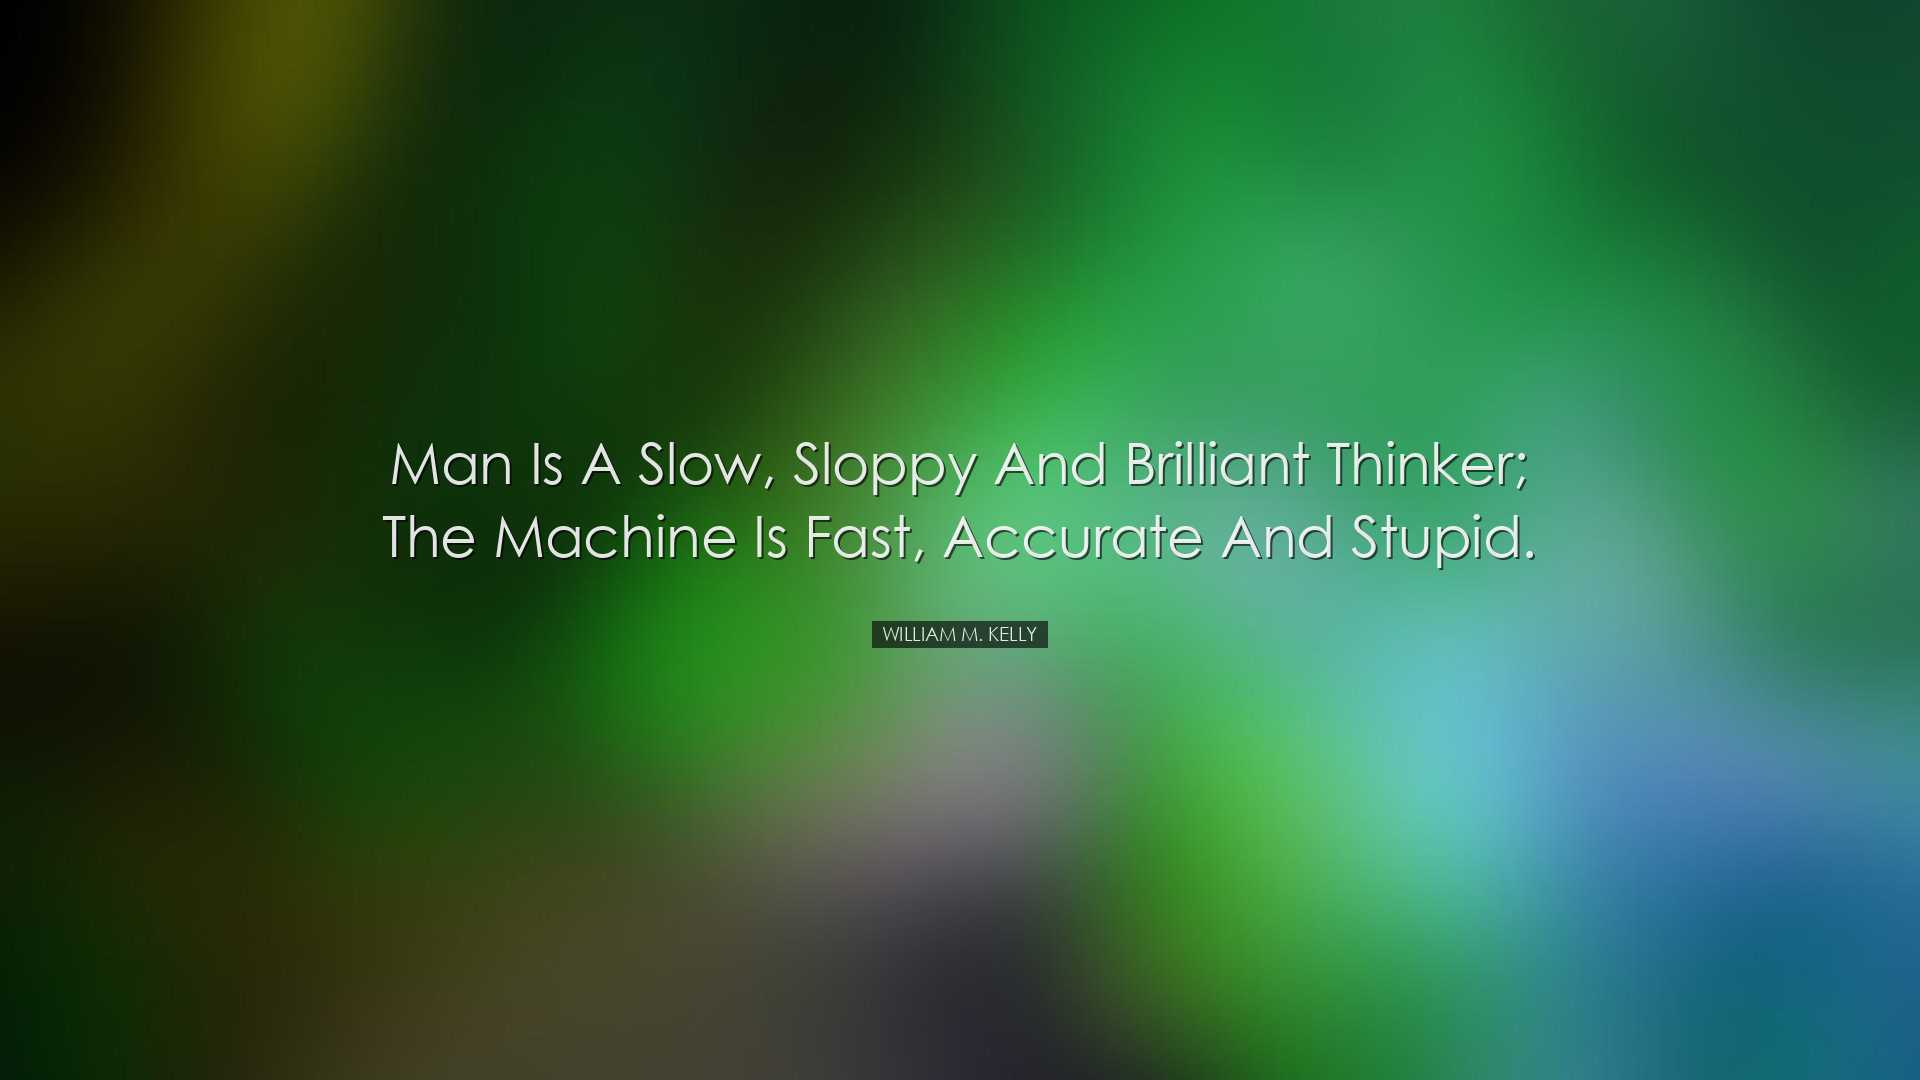 Man is a slow, sloppy and brilliant thinker; the machine is fast,